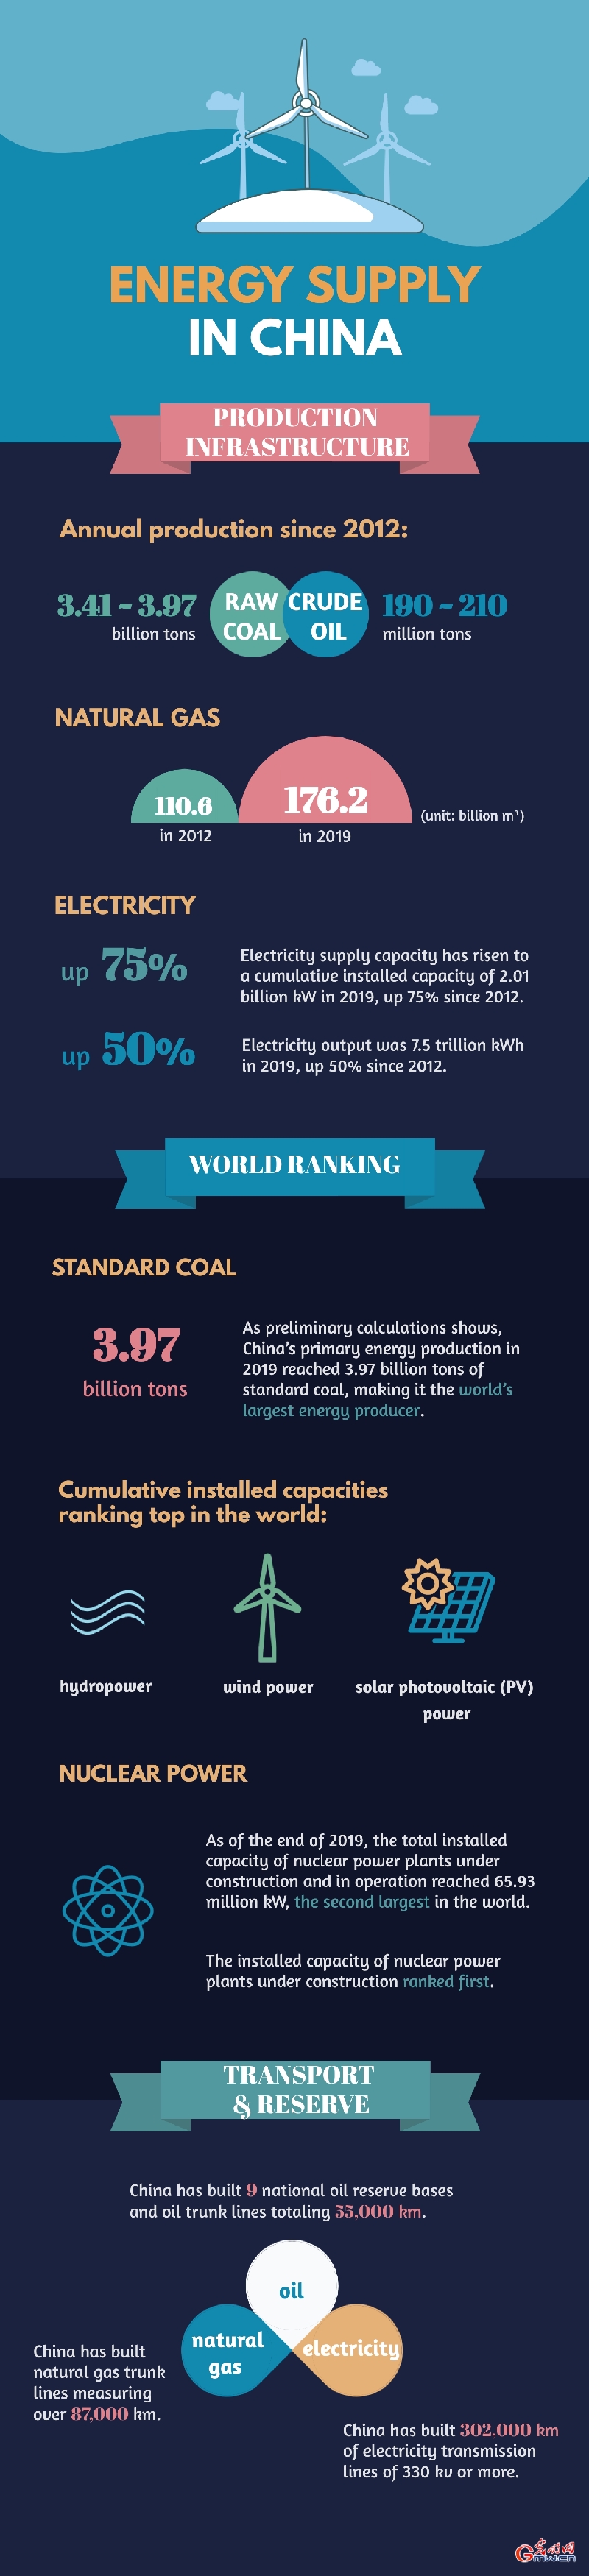 Infographic: energy supply in China